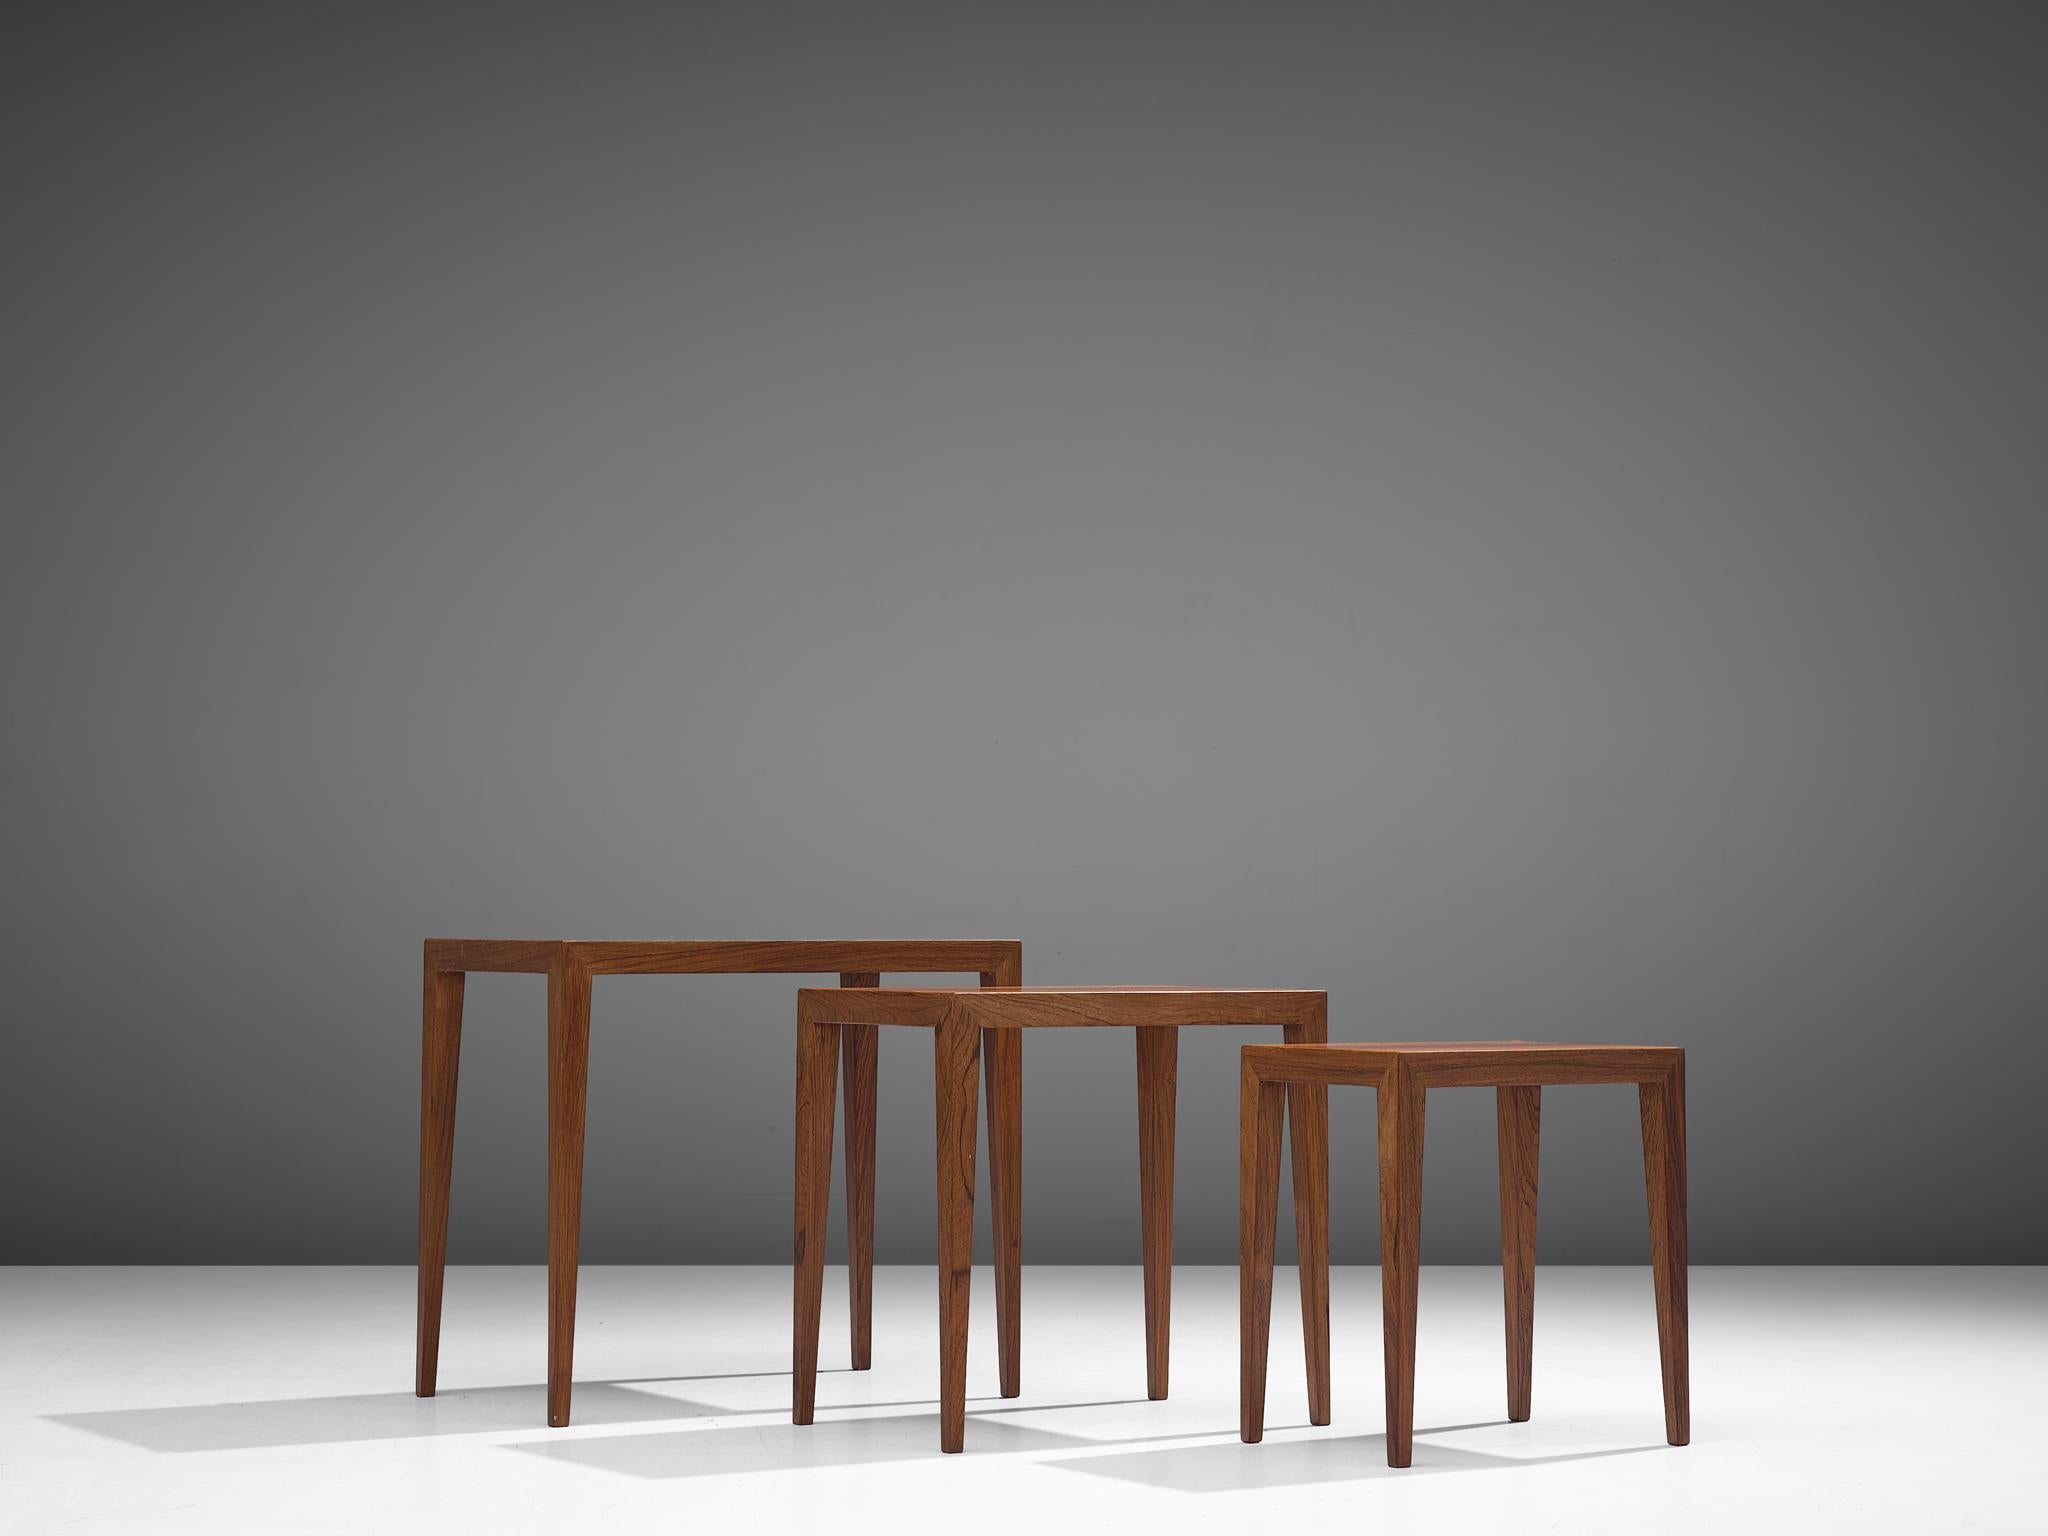 Severin Hansen, nesting tables 'model C-38-6', rosewood, Denmark, 1950s. 

These clean, modest and simple nesting tables feature rectangular tops with tapering legs. Very Danish, both in their aesthetics as in their construction. Well-constructed,